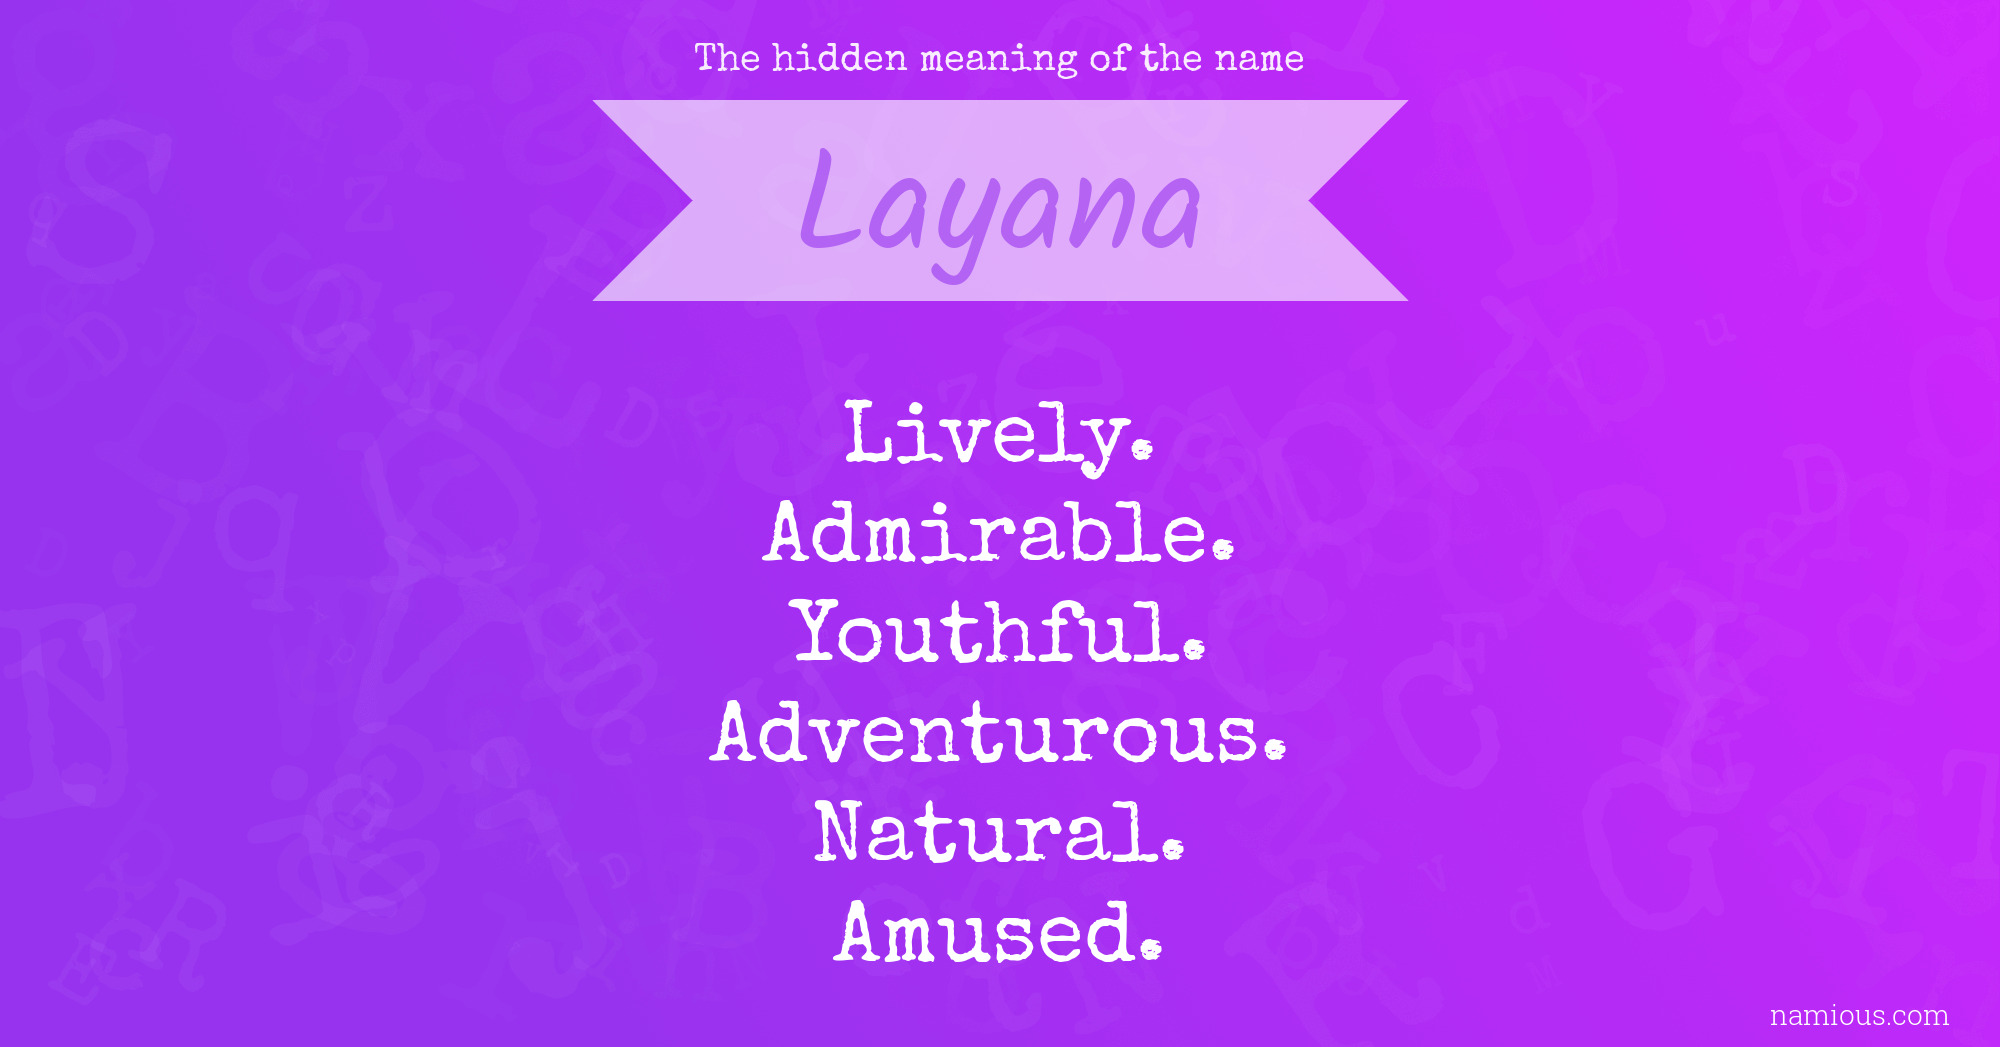 The hidden meaning of the name Layana